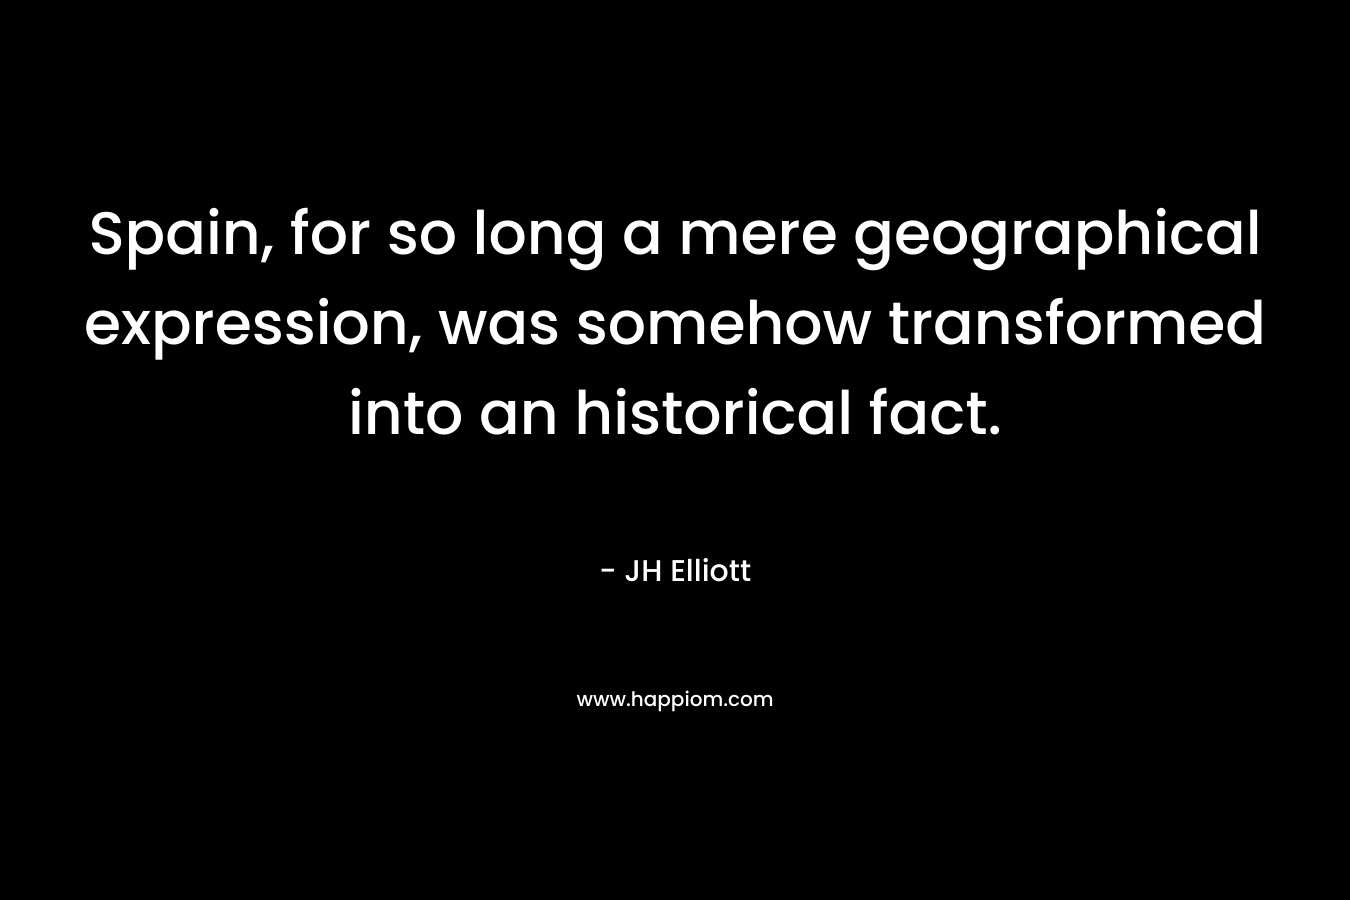 Spain, for so long a mere geographical expression, was somehow transformed into an historical fact. – JH Elliott